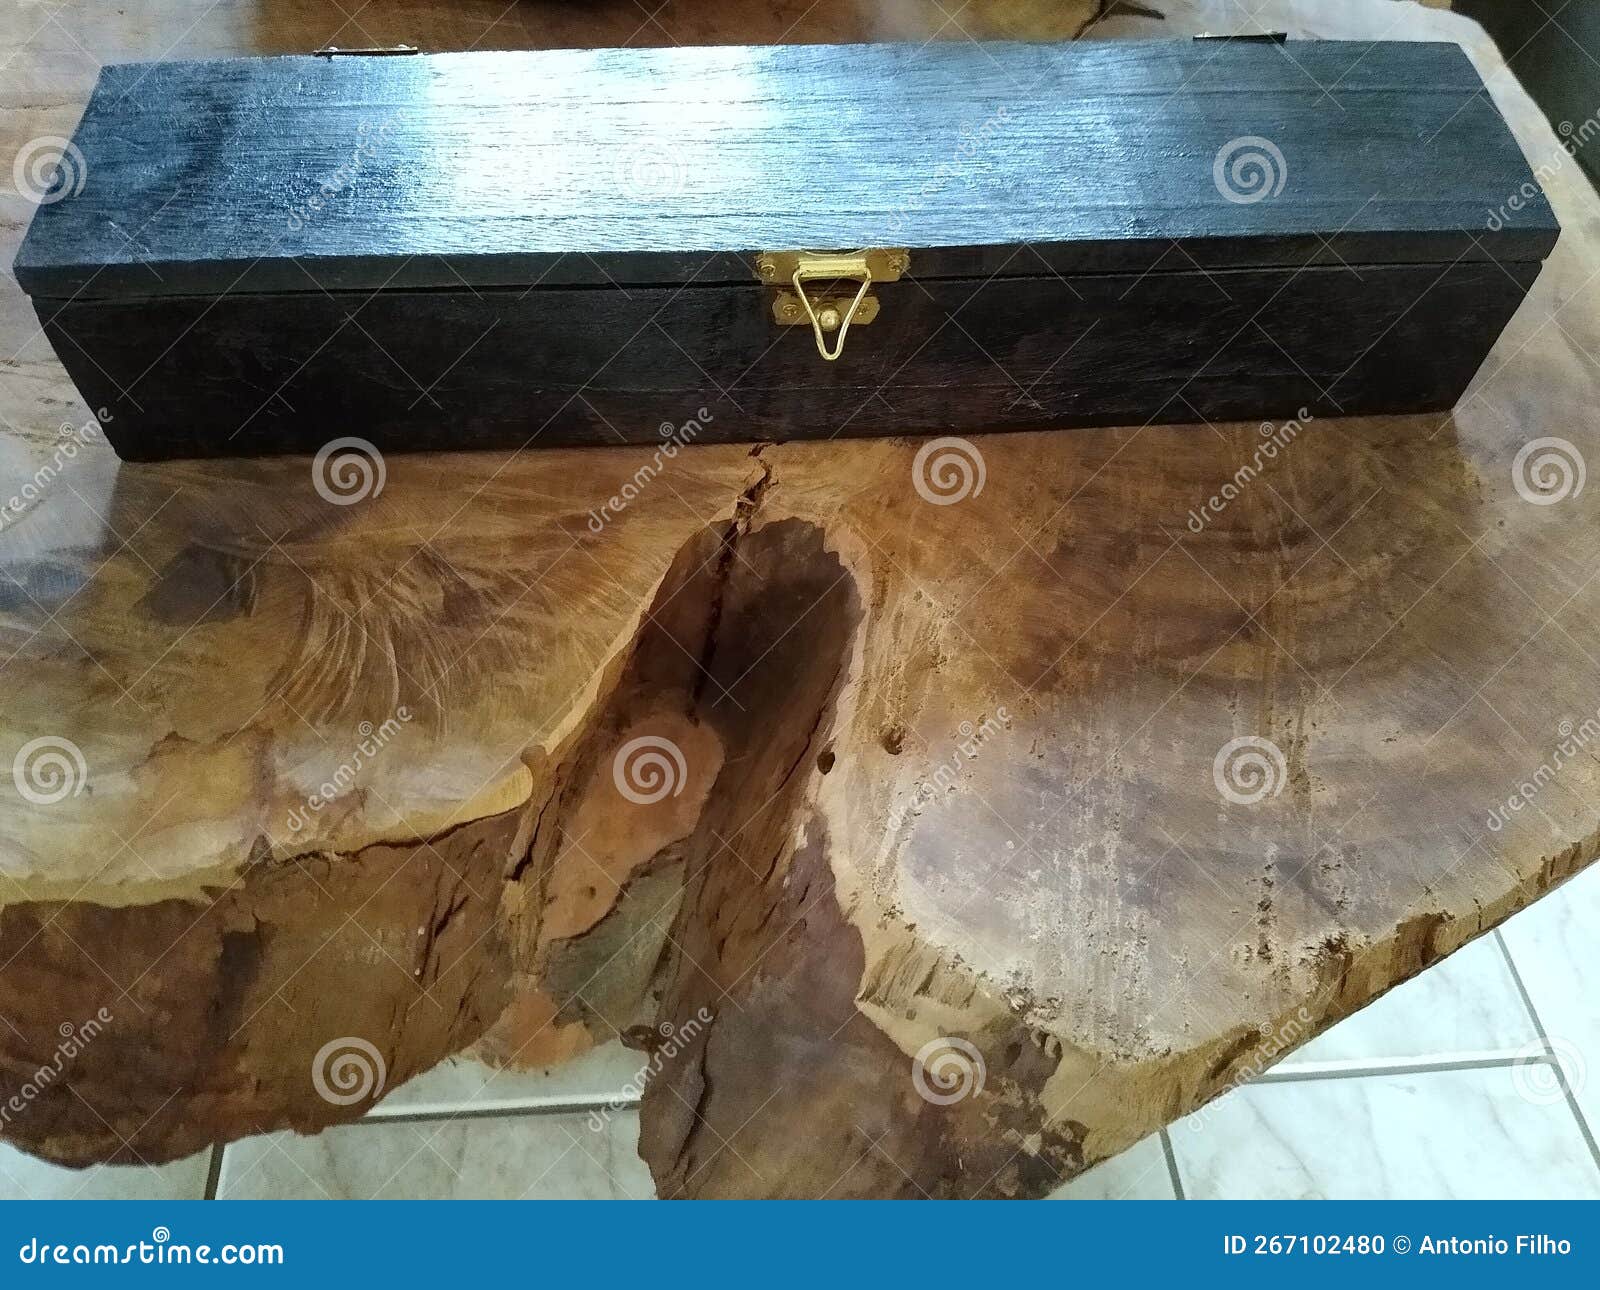 the wooden black box on the table